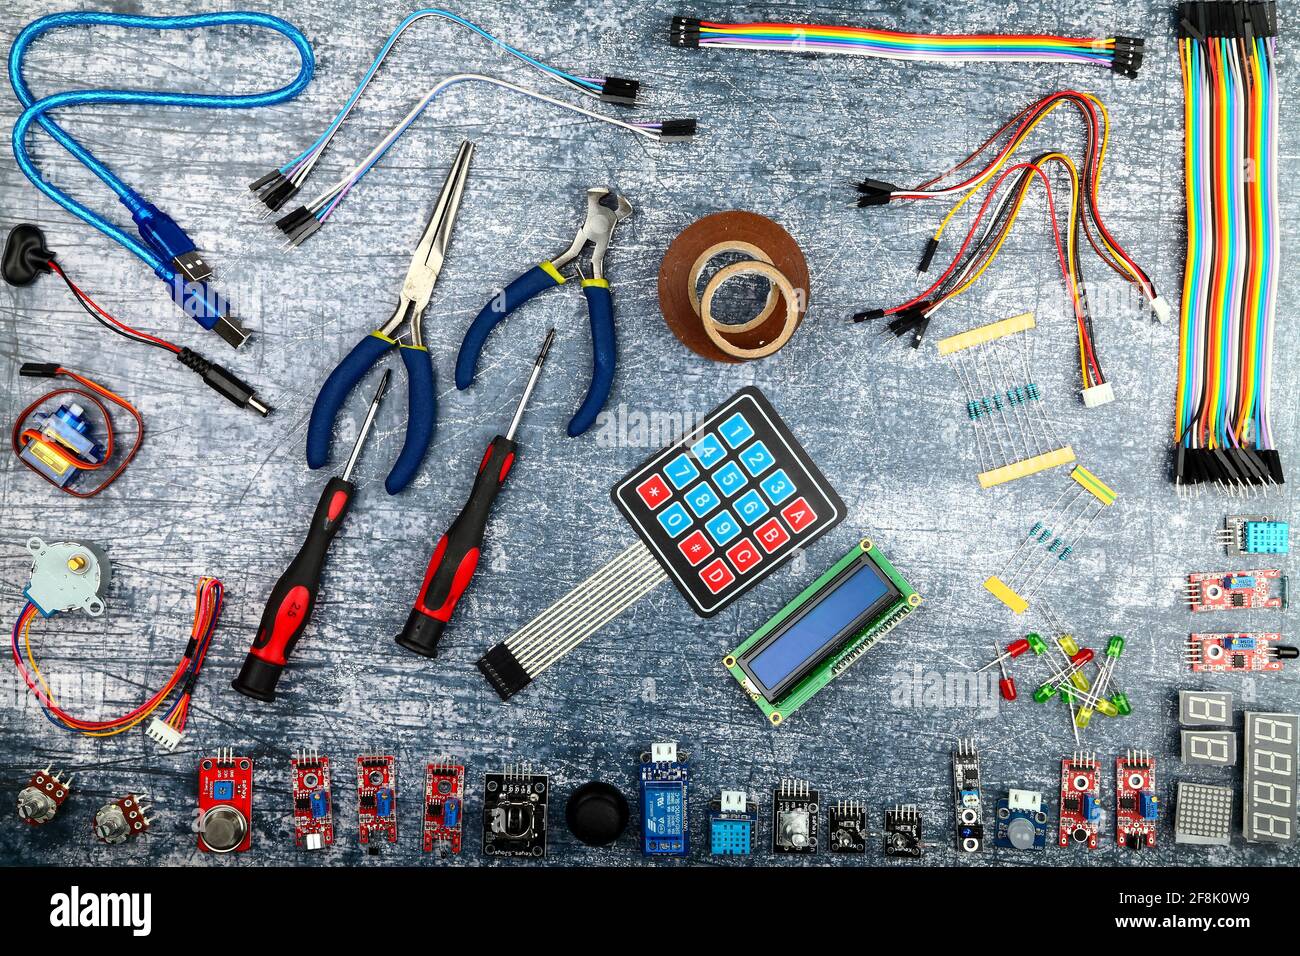 Arduino uno and electronic components flatlay on a blue rustic background Stock Photo